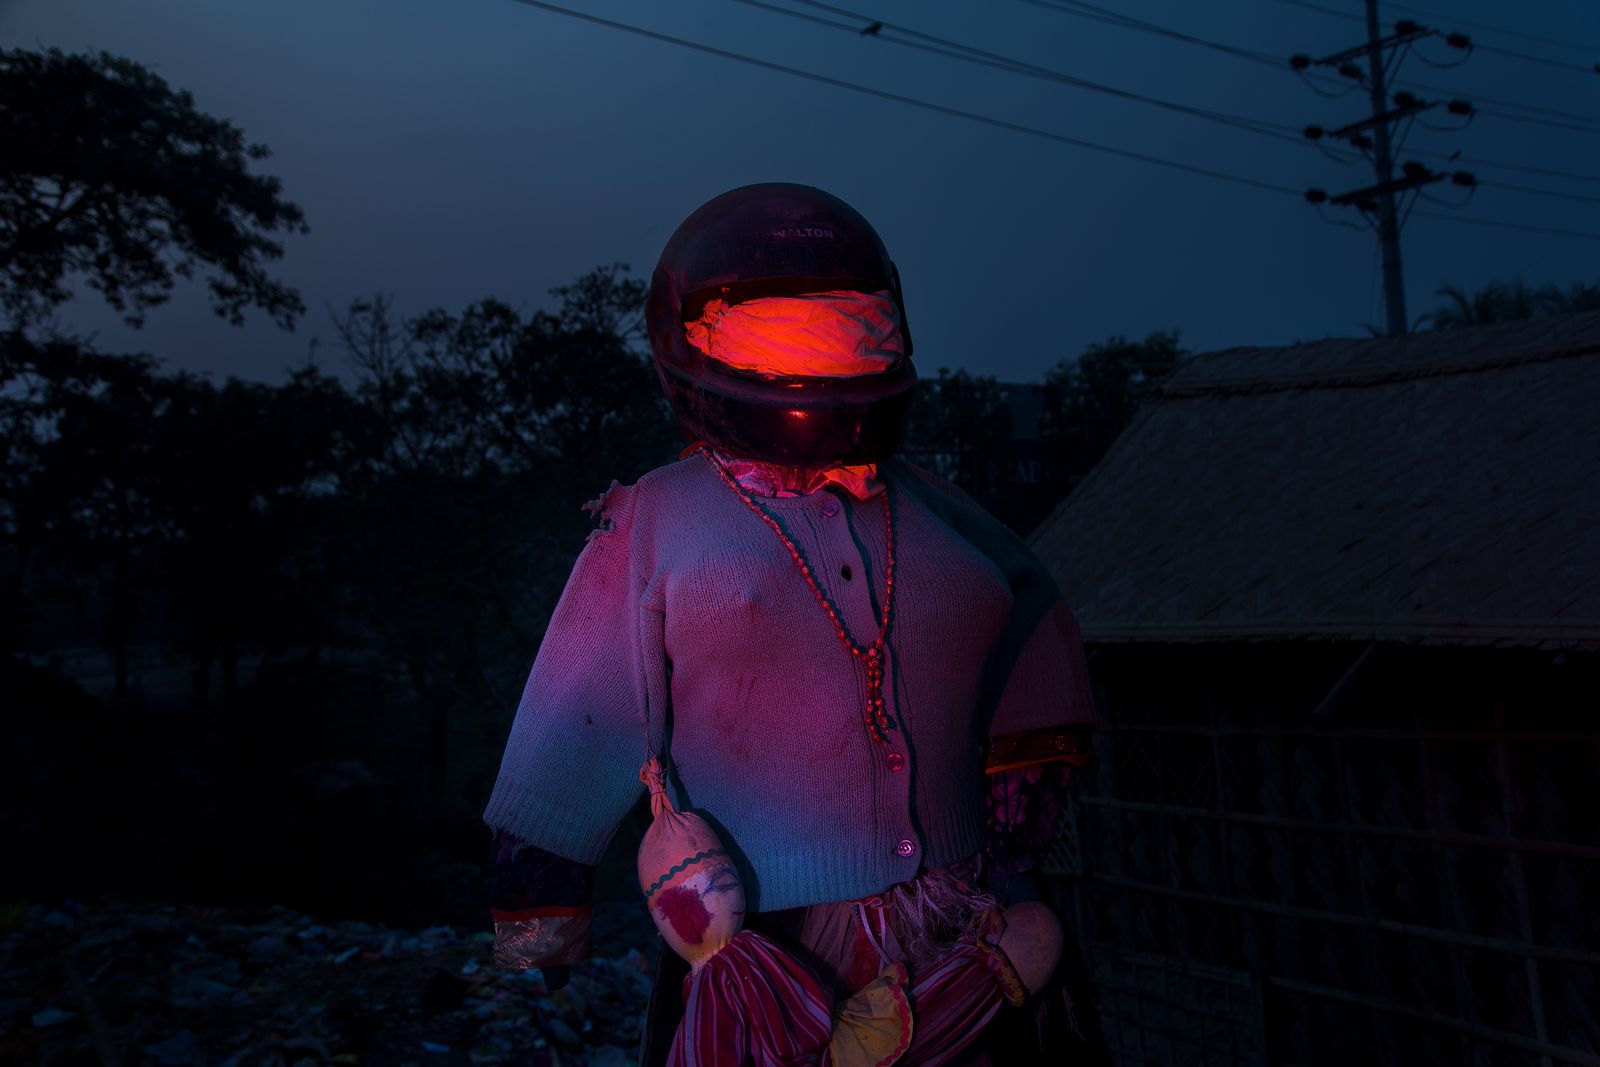 © Anupam Diwan - Image from the FIREFLIES photography project